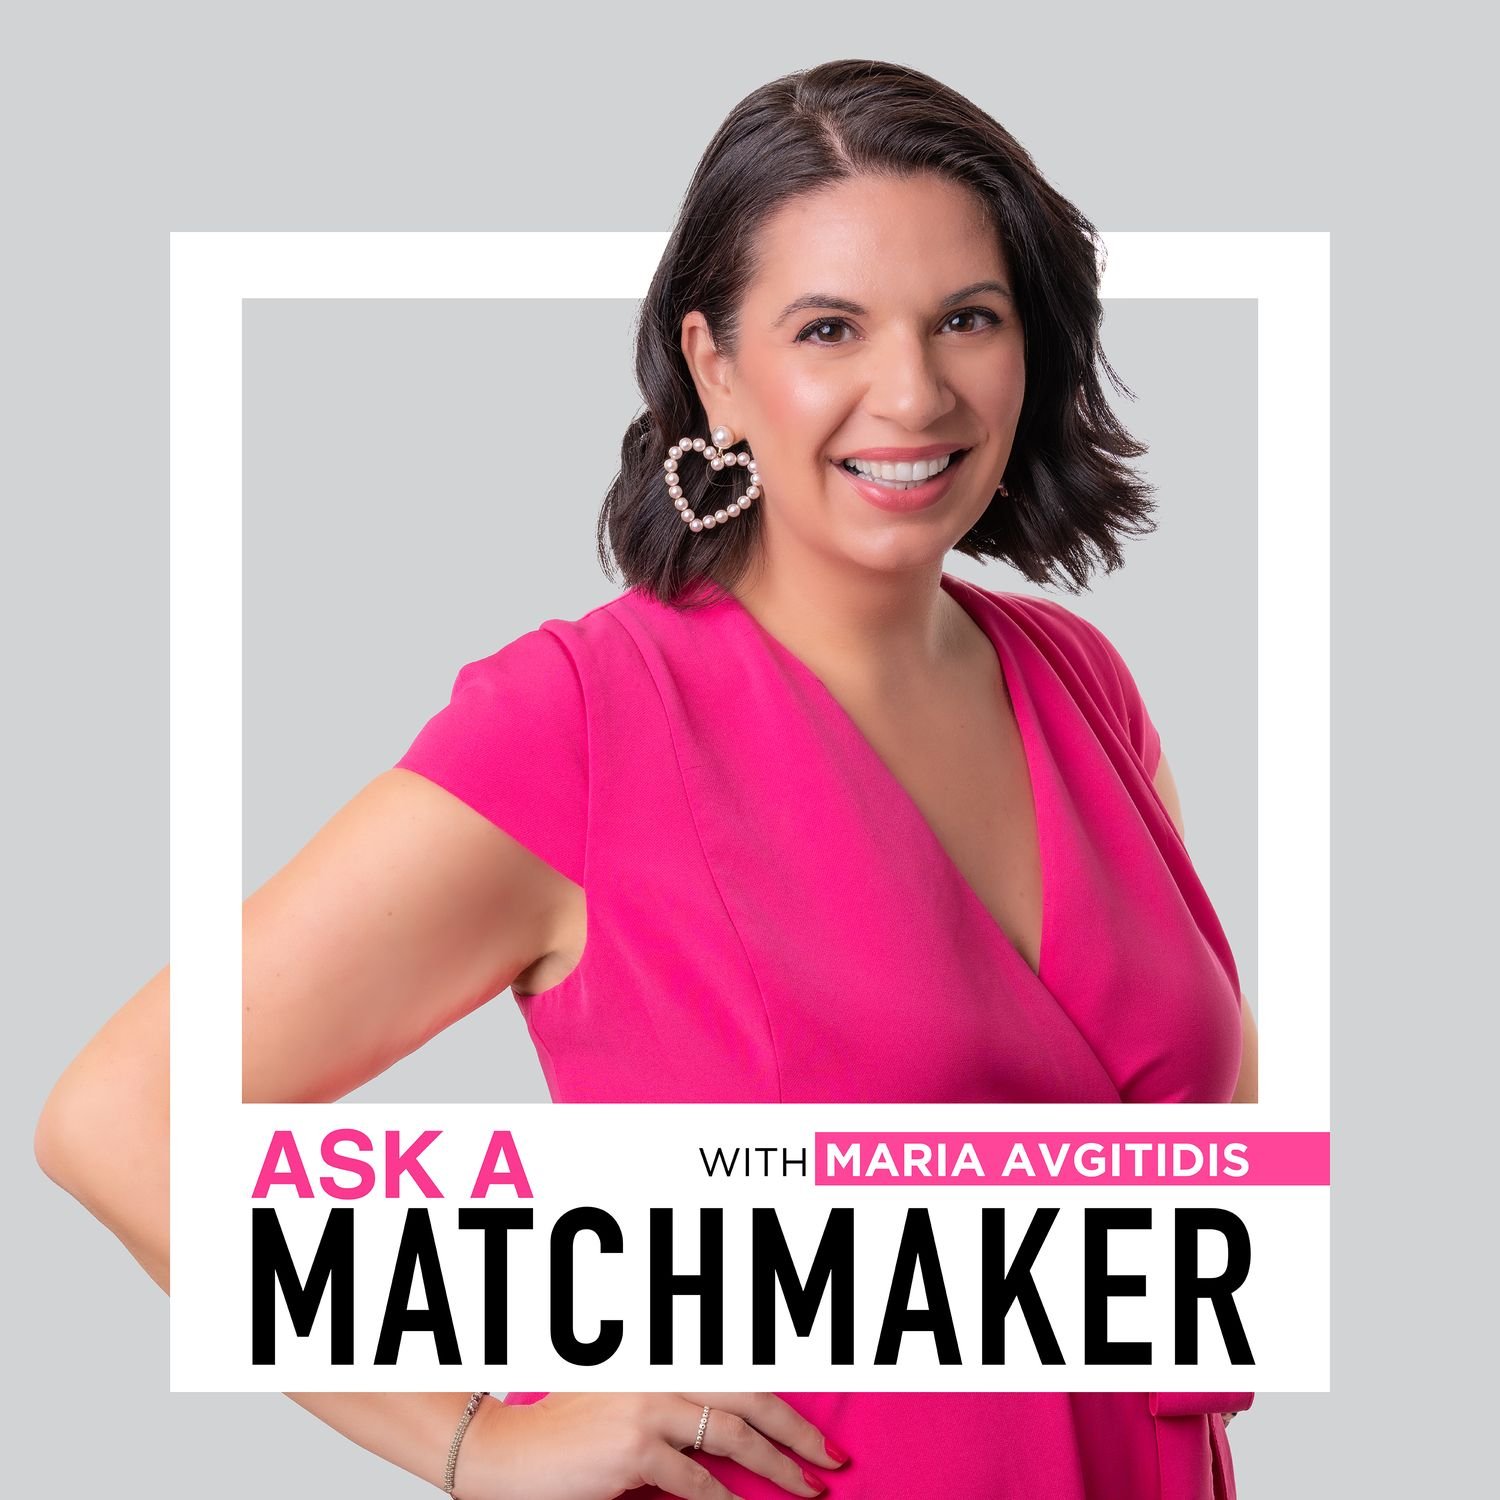 Ask a Matchmaker podcast show image